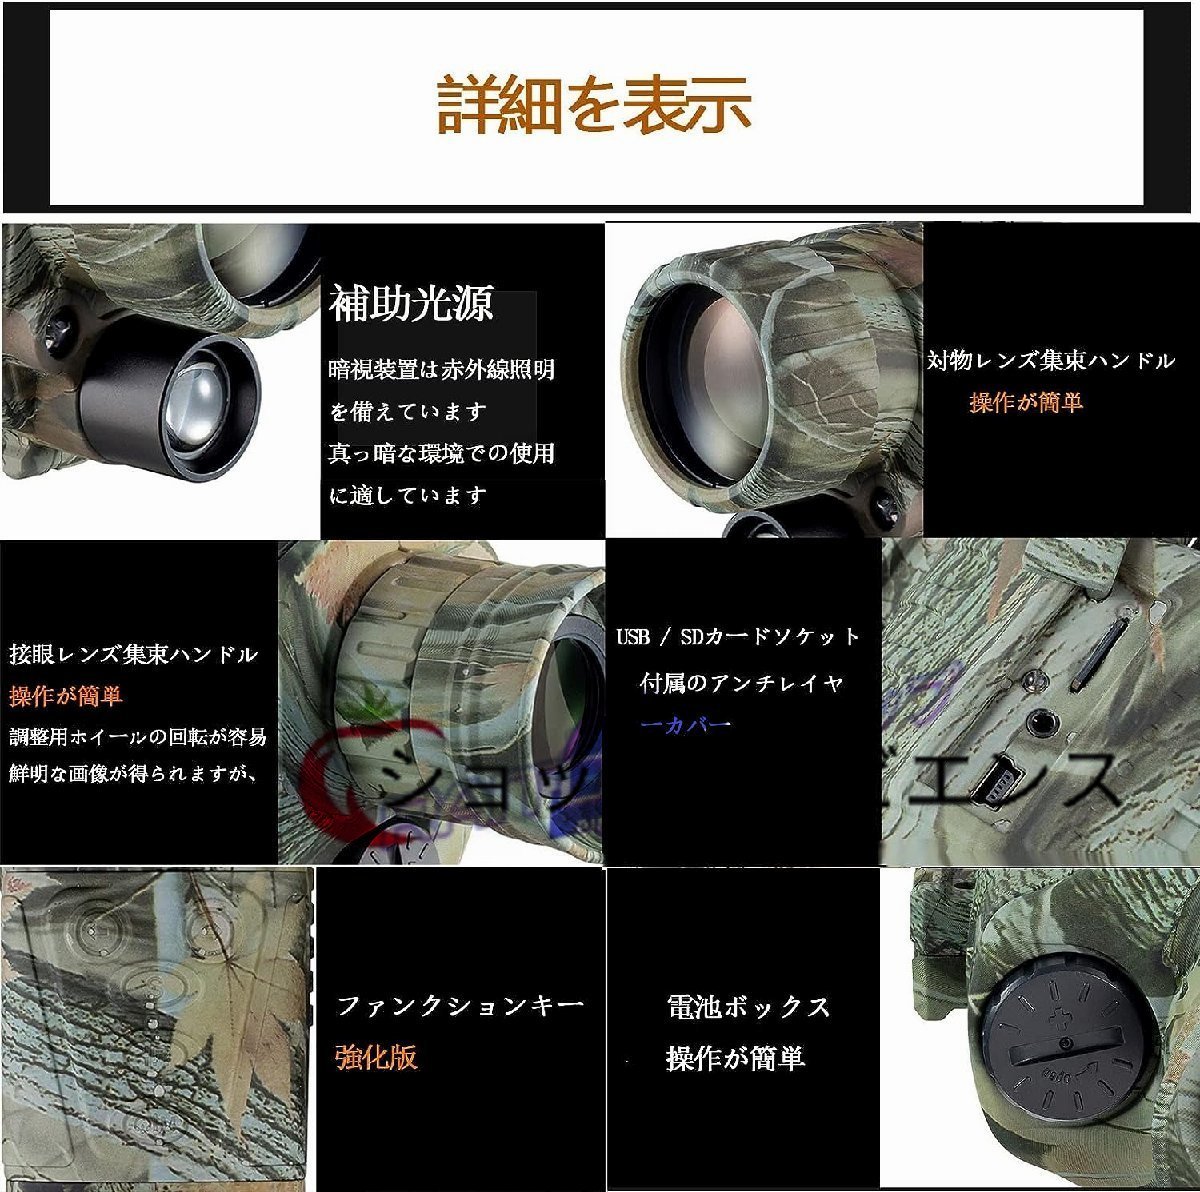  night vision scope army for infra-red rays digital camera night vision height magnification telescope night vision mirror super zoom photographing video recording day and night combined use monitoring hunting field observation storage sack attaching 